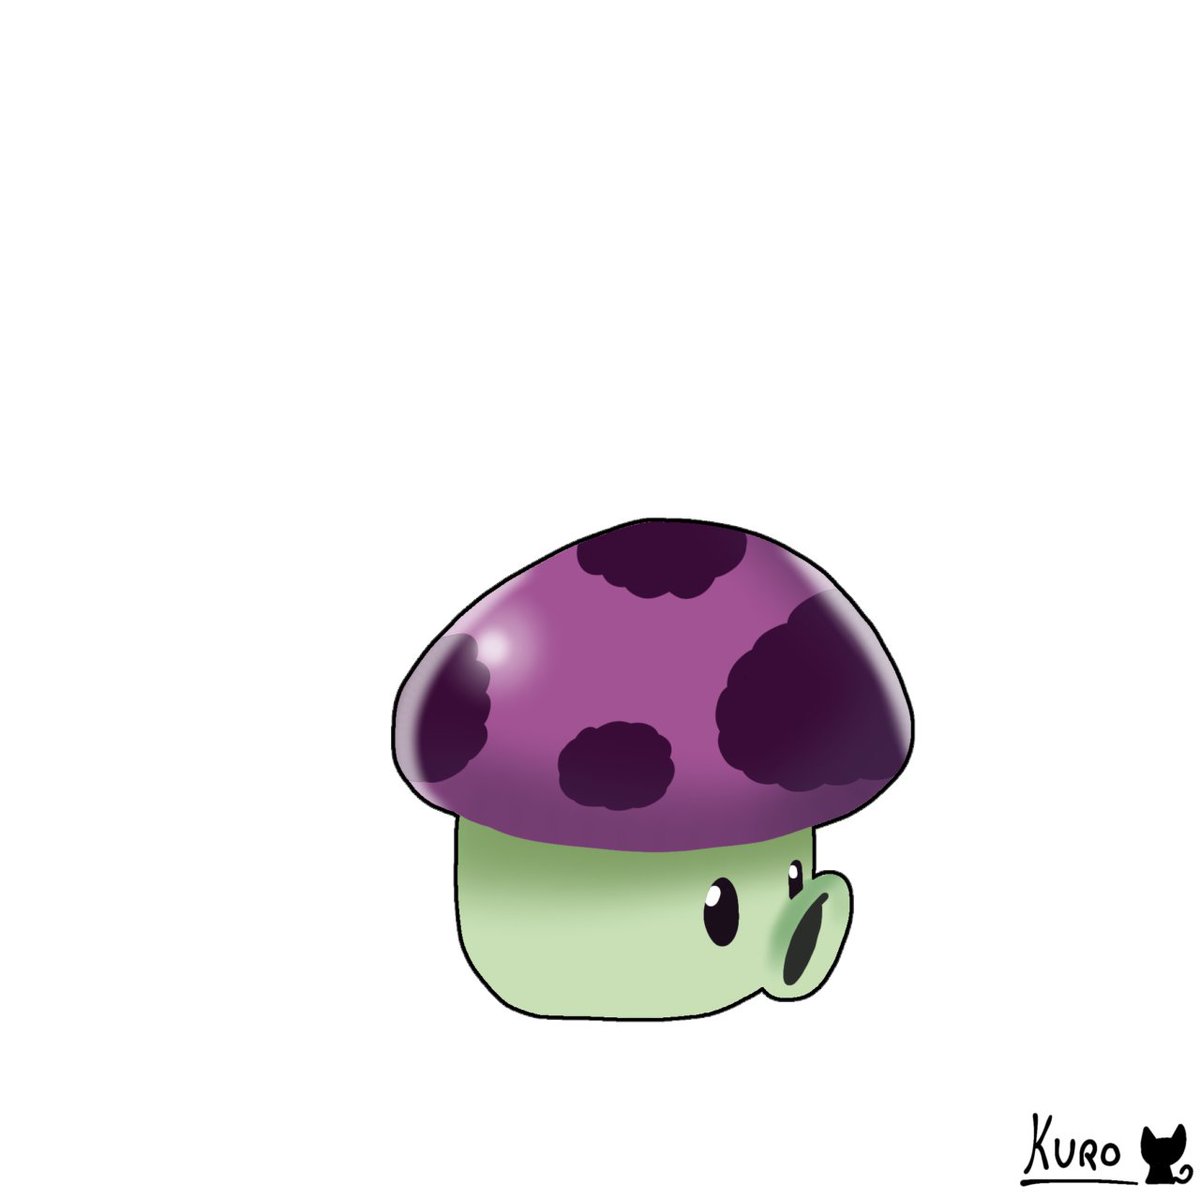 Everyday drawing Pvz plants 
Day 8: Repeater and Puff-shroom 
Since I didn't draw anything yesterday, I did 2 today (I don't know what happened with the puff-shroom sorry😭😭😭)
#plantsvszombies #Pvz #pvzfanart